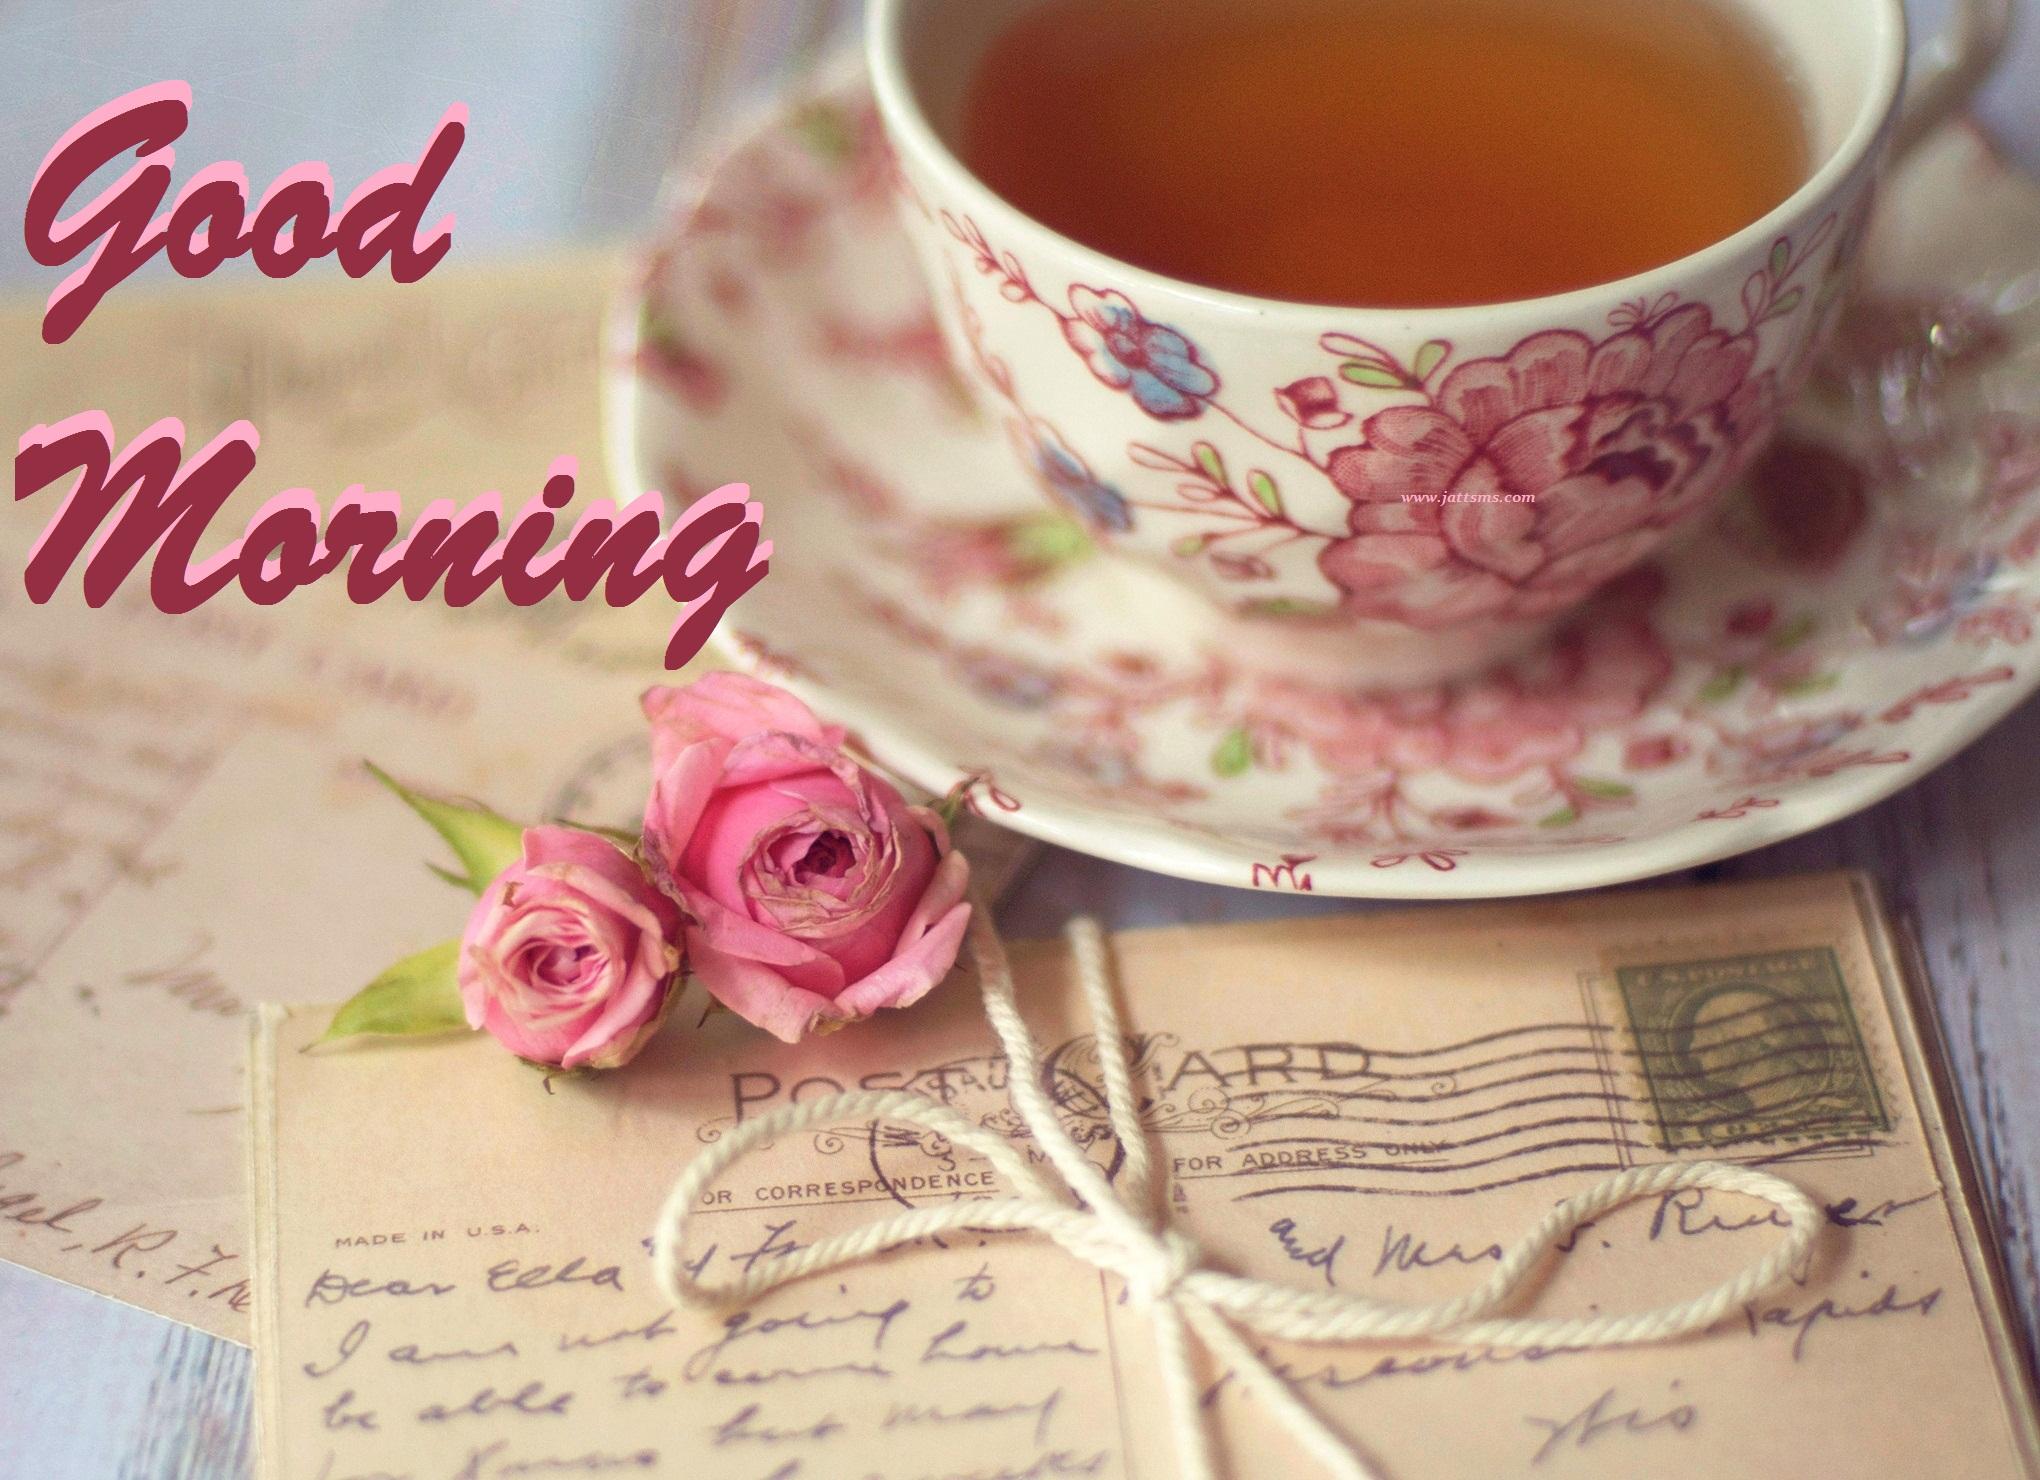 good morning wallpaper download,cup,teacup,coffee cup,cup,pink